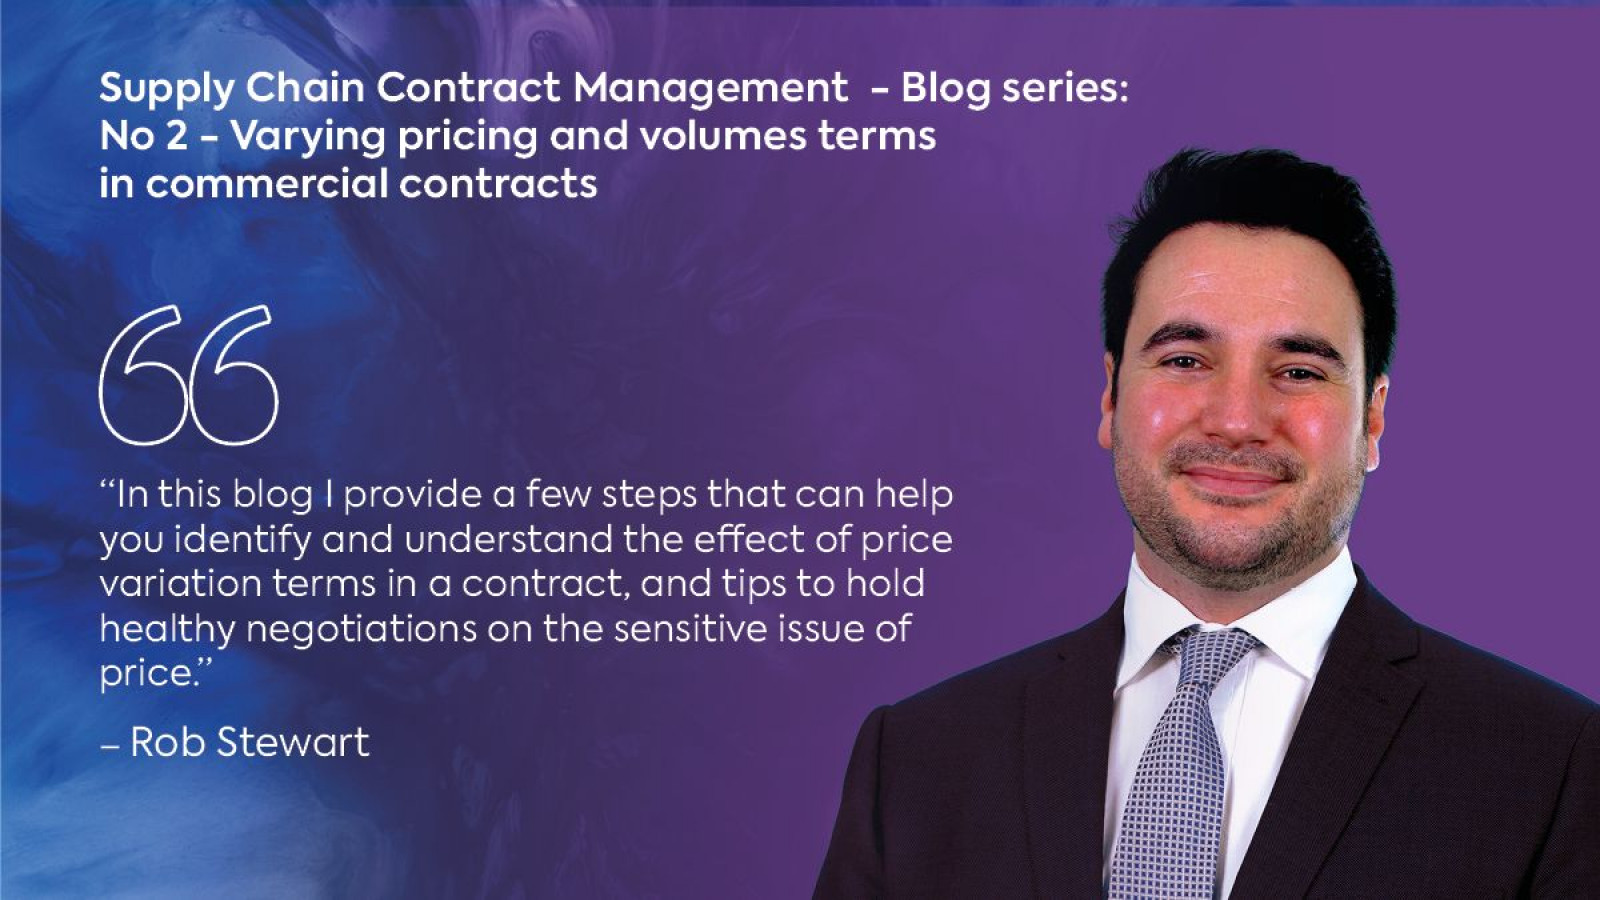 Supply chain contract management blog series #2: V...